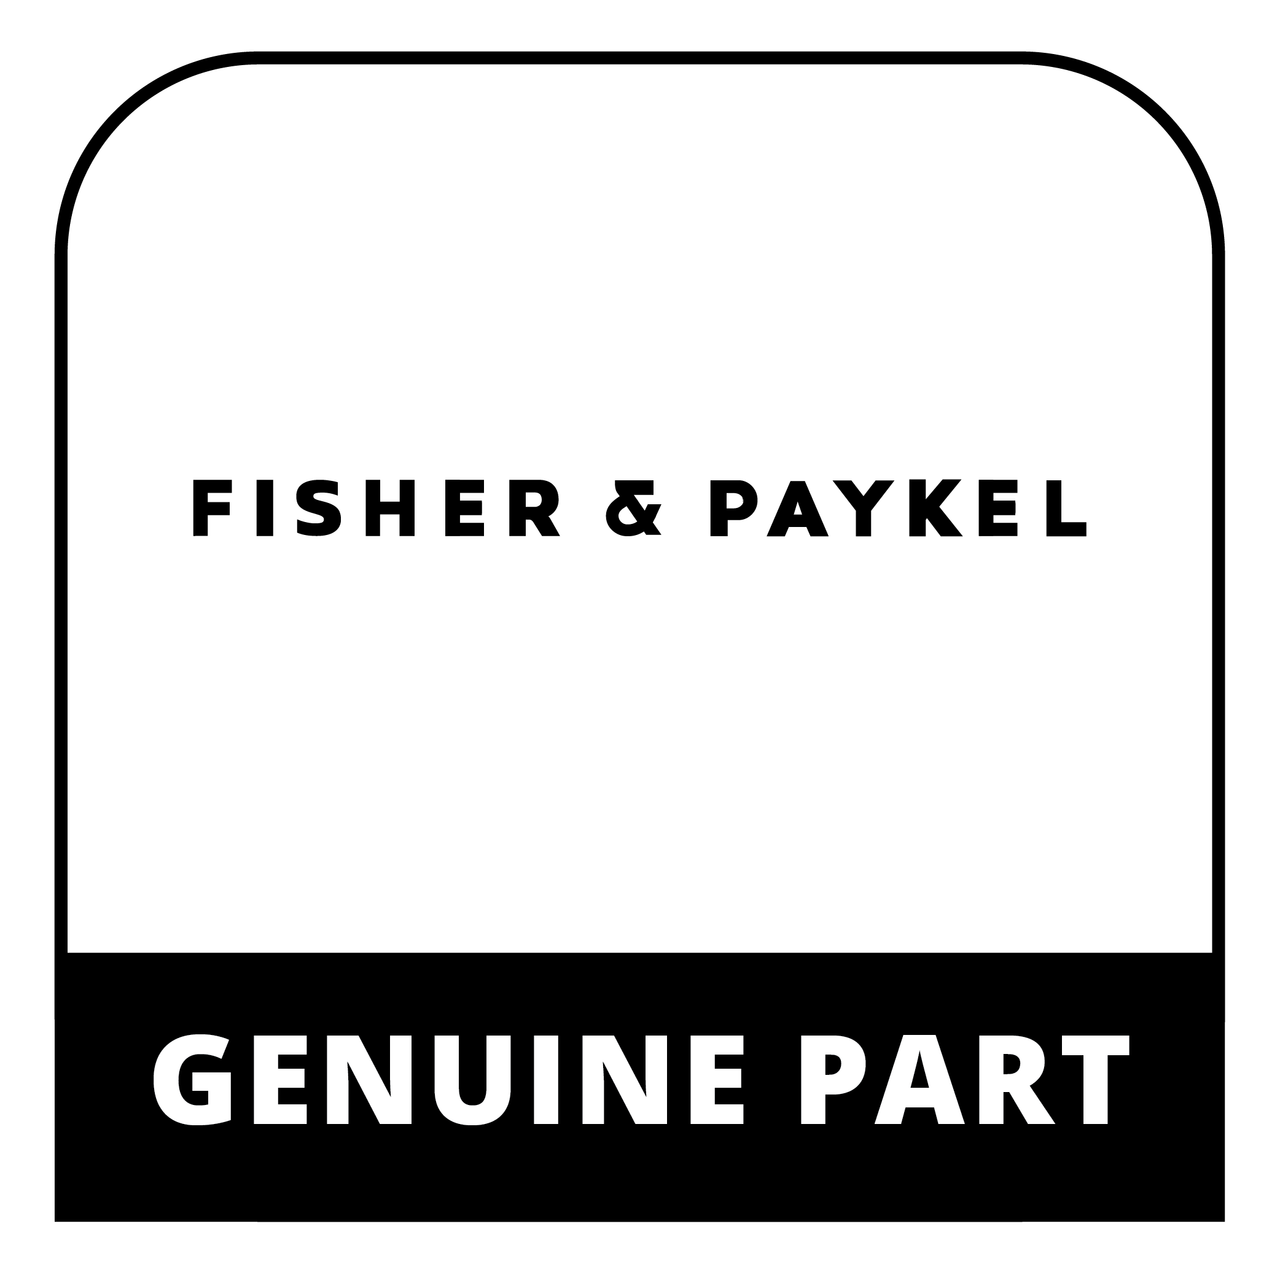 Fisher & Paykel 573814 - Frame Oven Sdbgx1 - Genuine Fisher & Paykel (DCS) Part